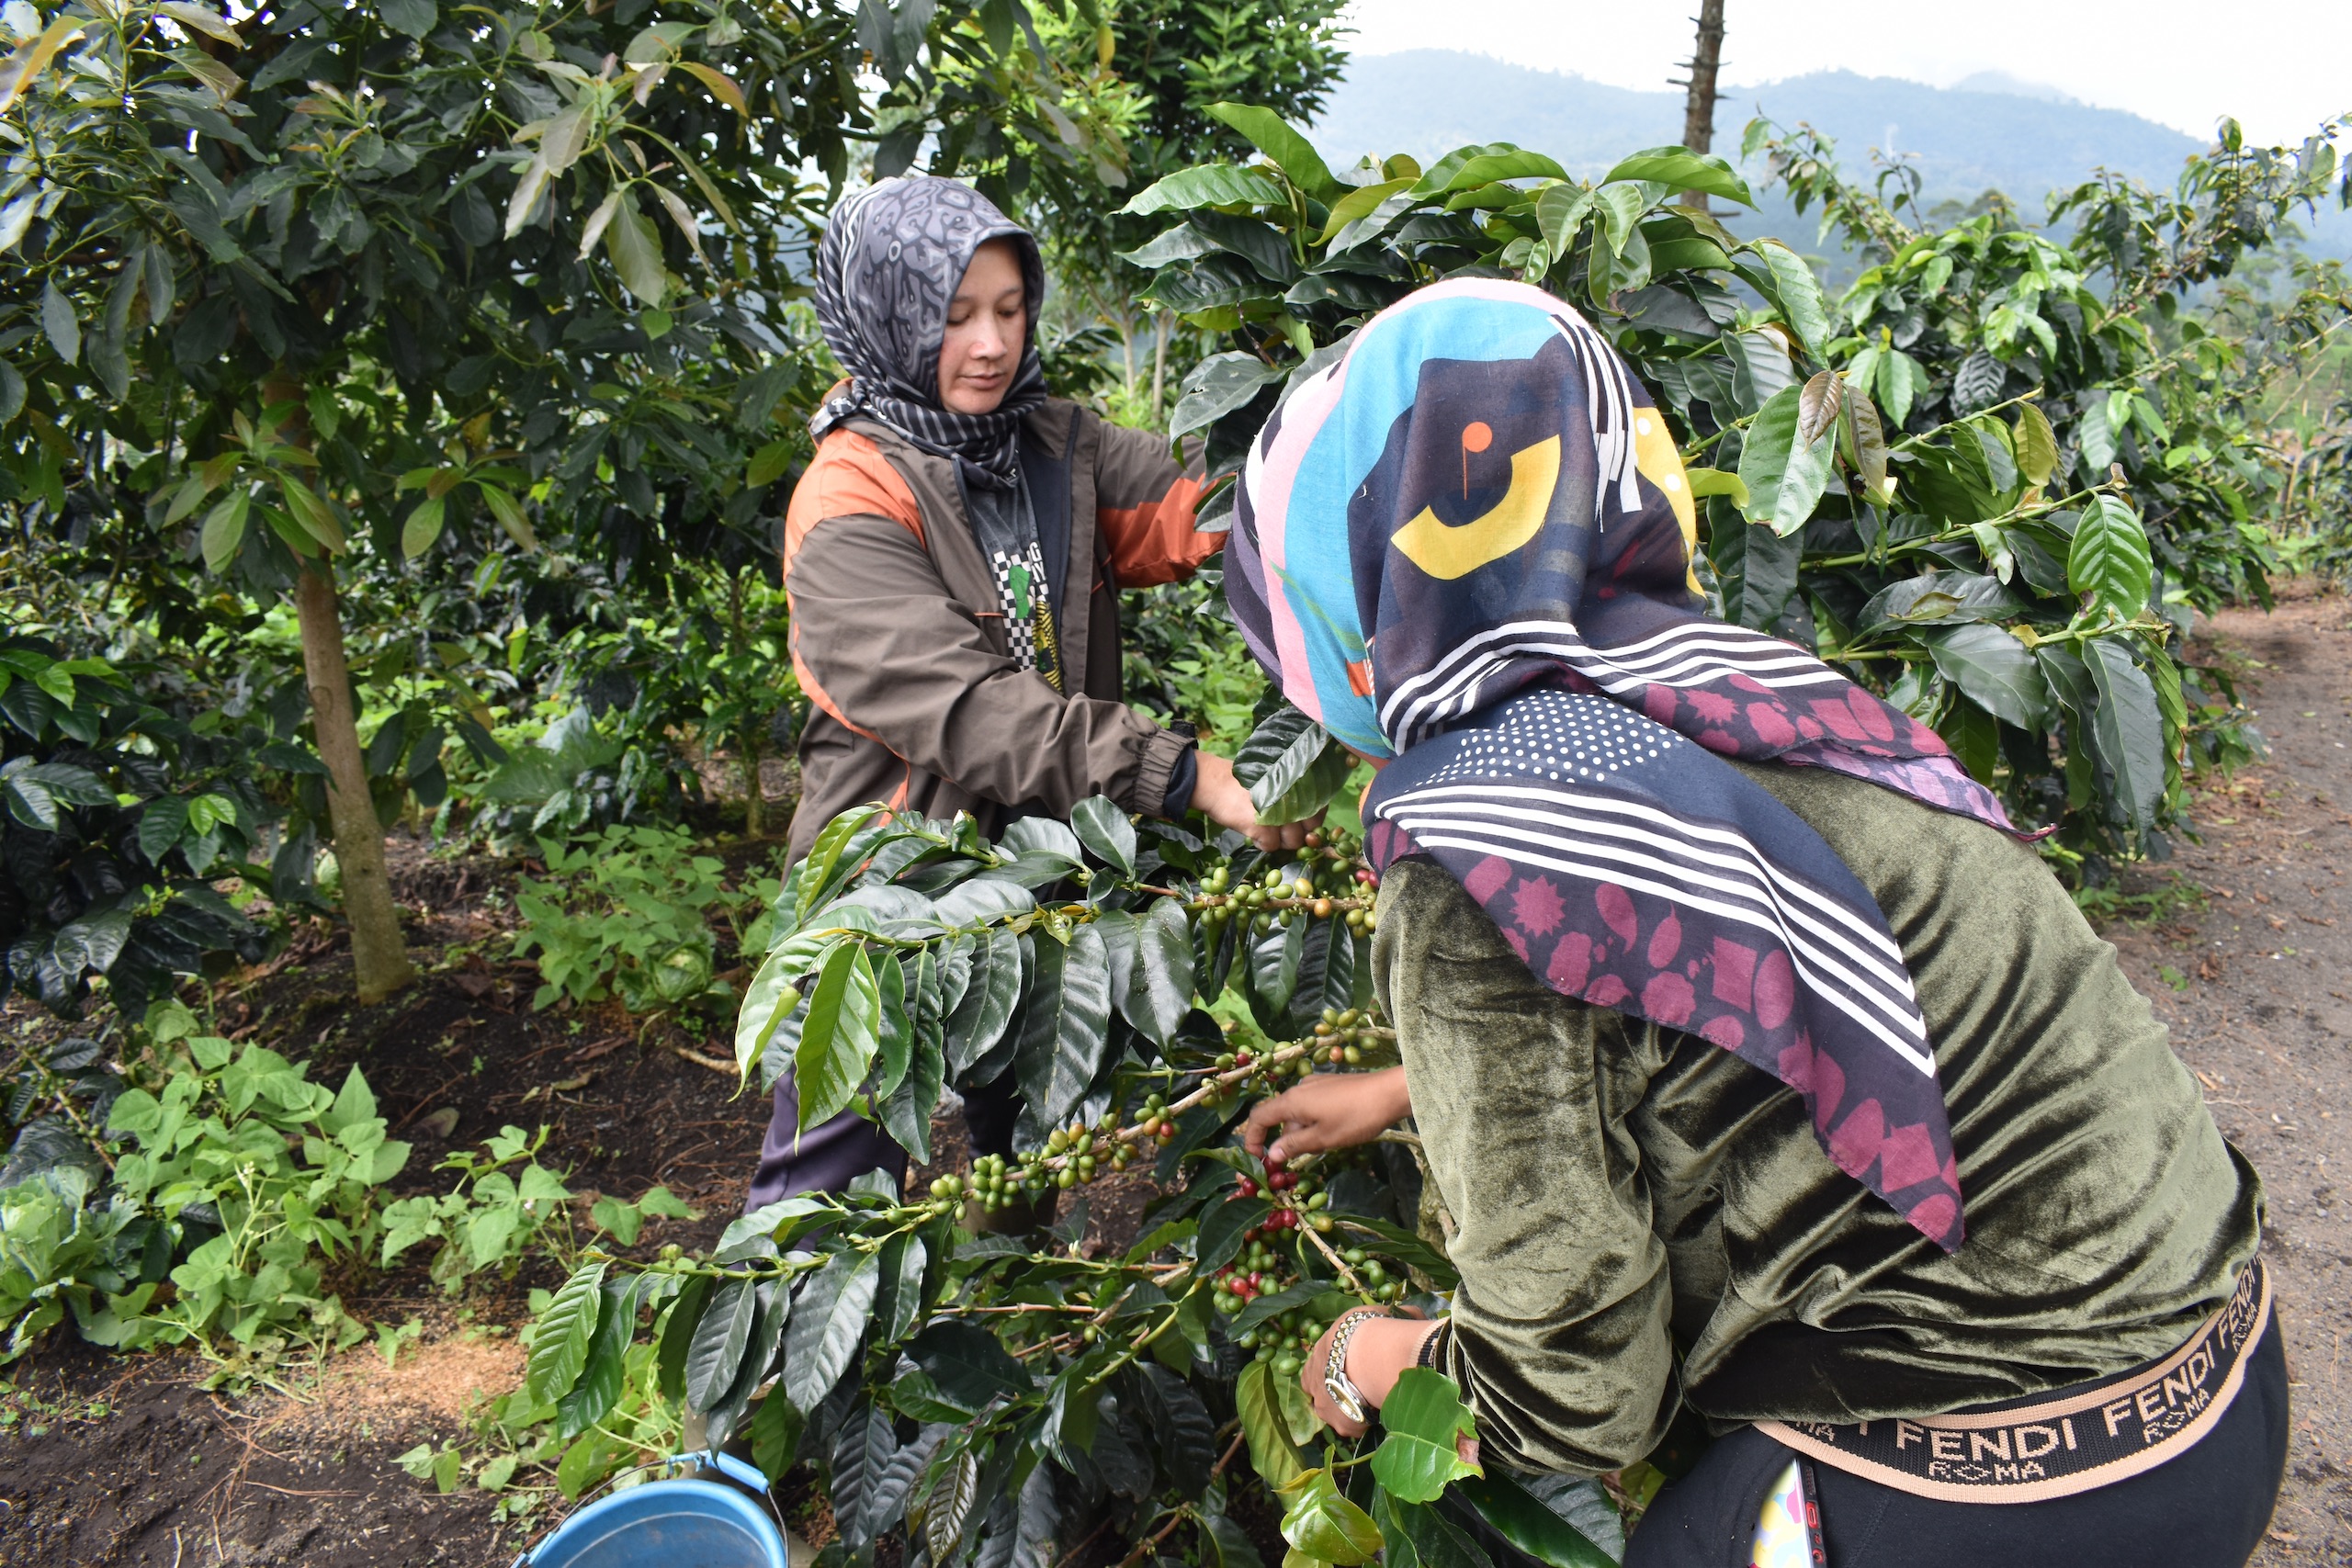 <p>Harvesting coffee in Ibun, West Java, Indonesia. The beans will be processed at a facility supported by the Nusantara Fund, set up in May to channel climate finance directly to Indigenous communities across the country. (Image: Fidelis Satriastanti)</p>